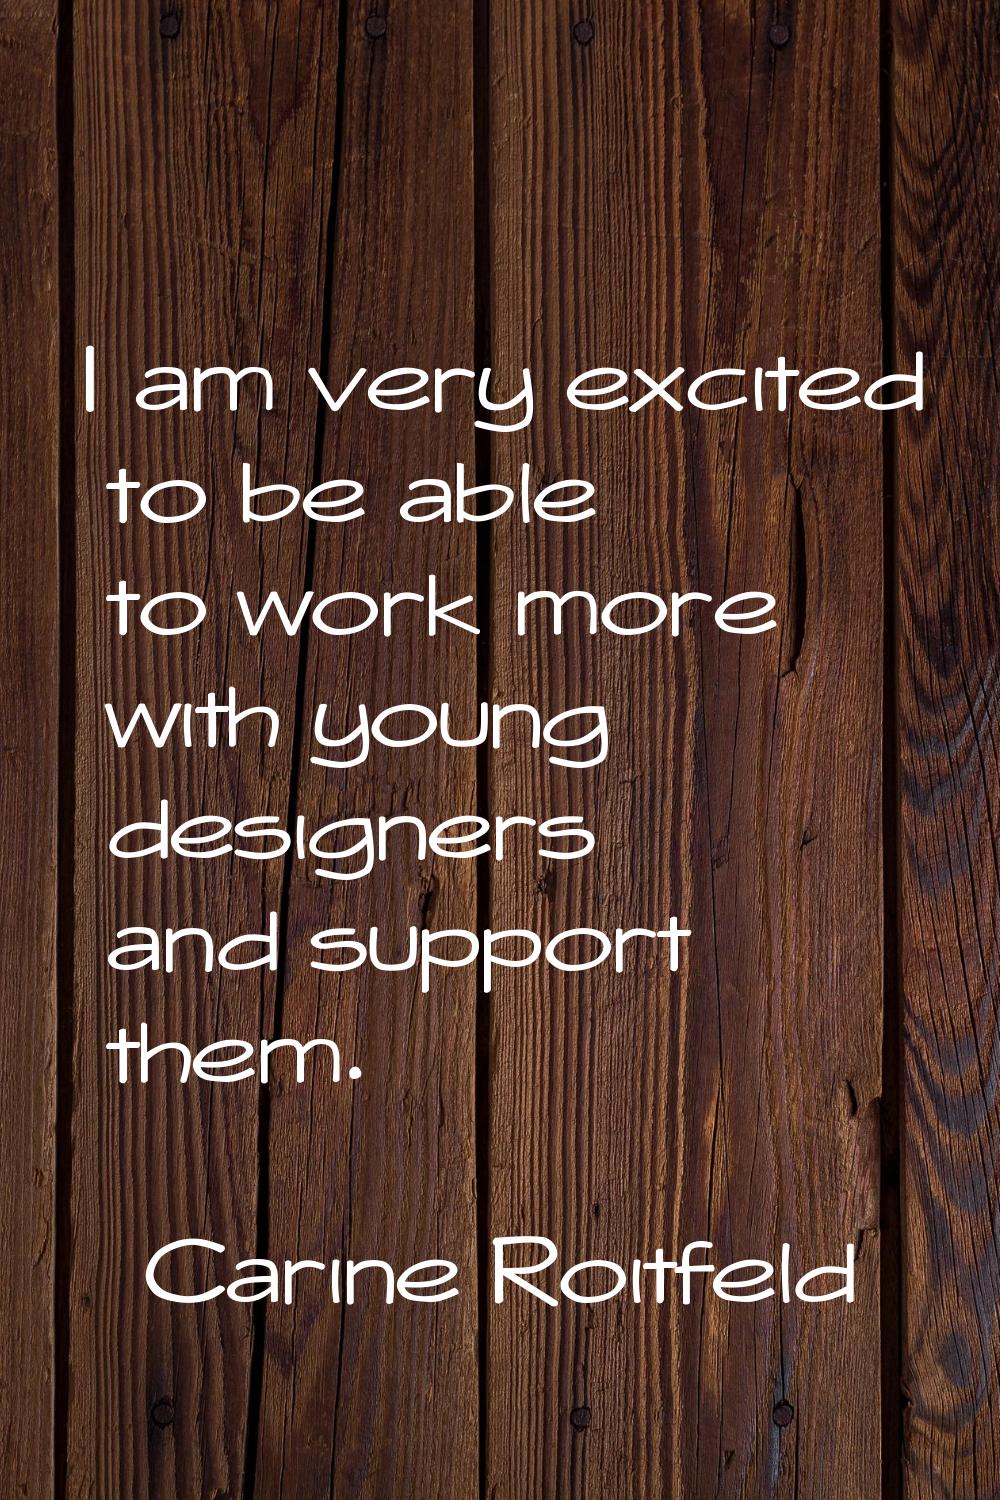 I am very excited to be able to work more with young designers and support them.